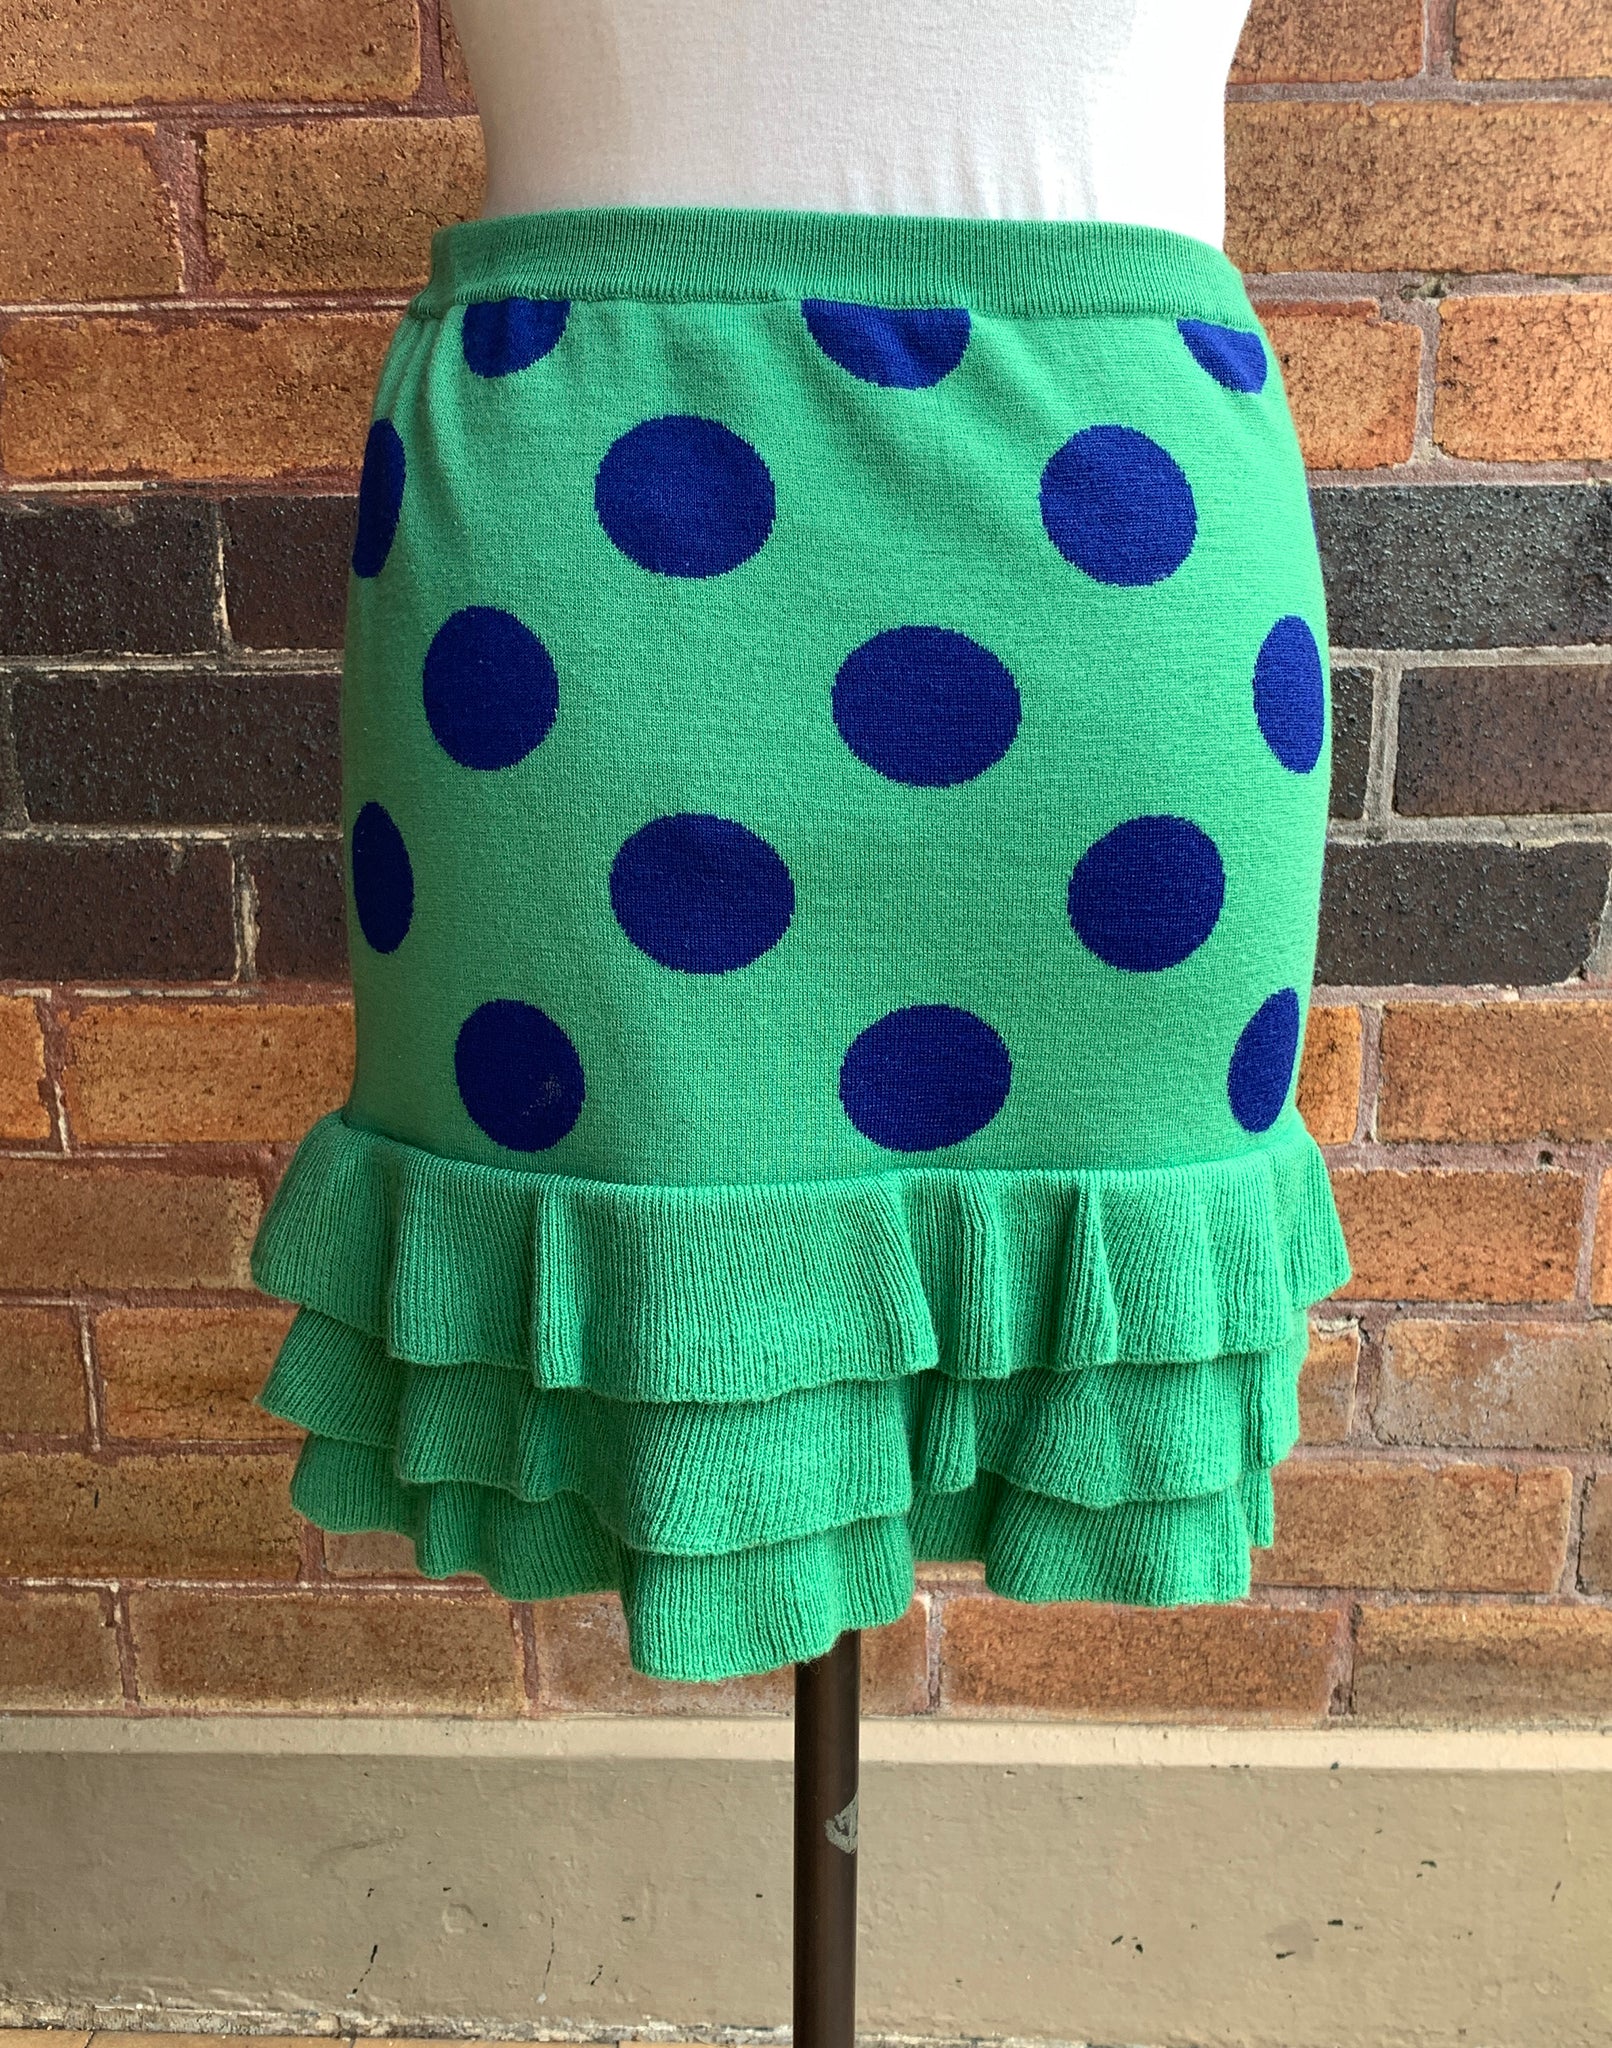 Moschino Boutique Green Wool Polka Dot Skirt Size XS / S